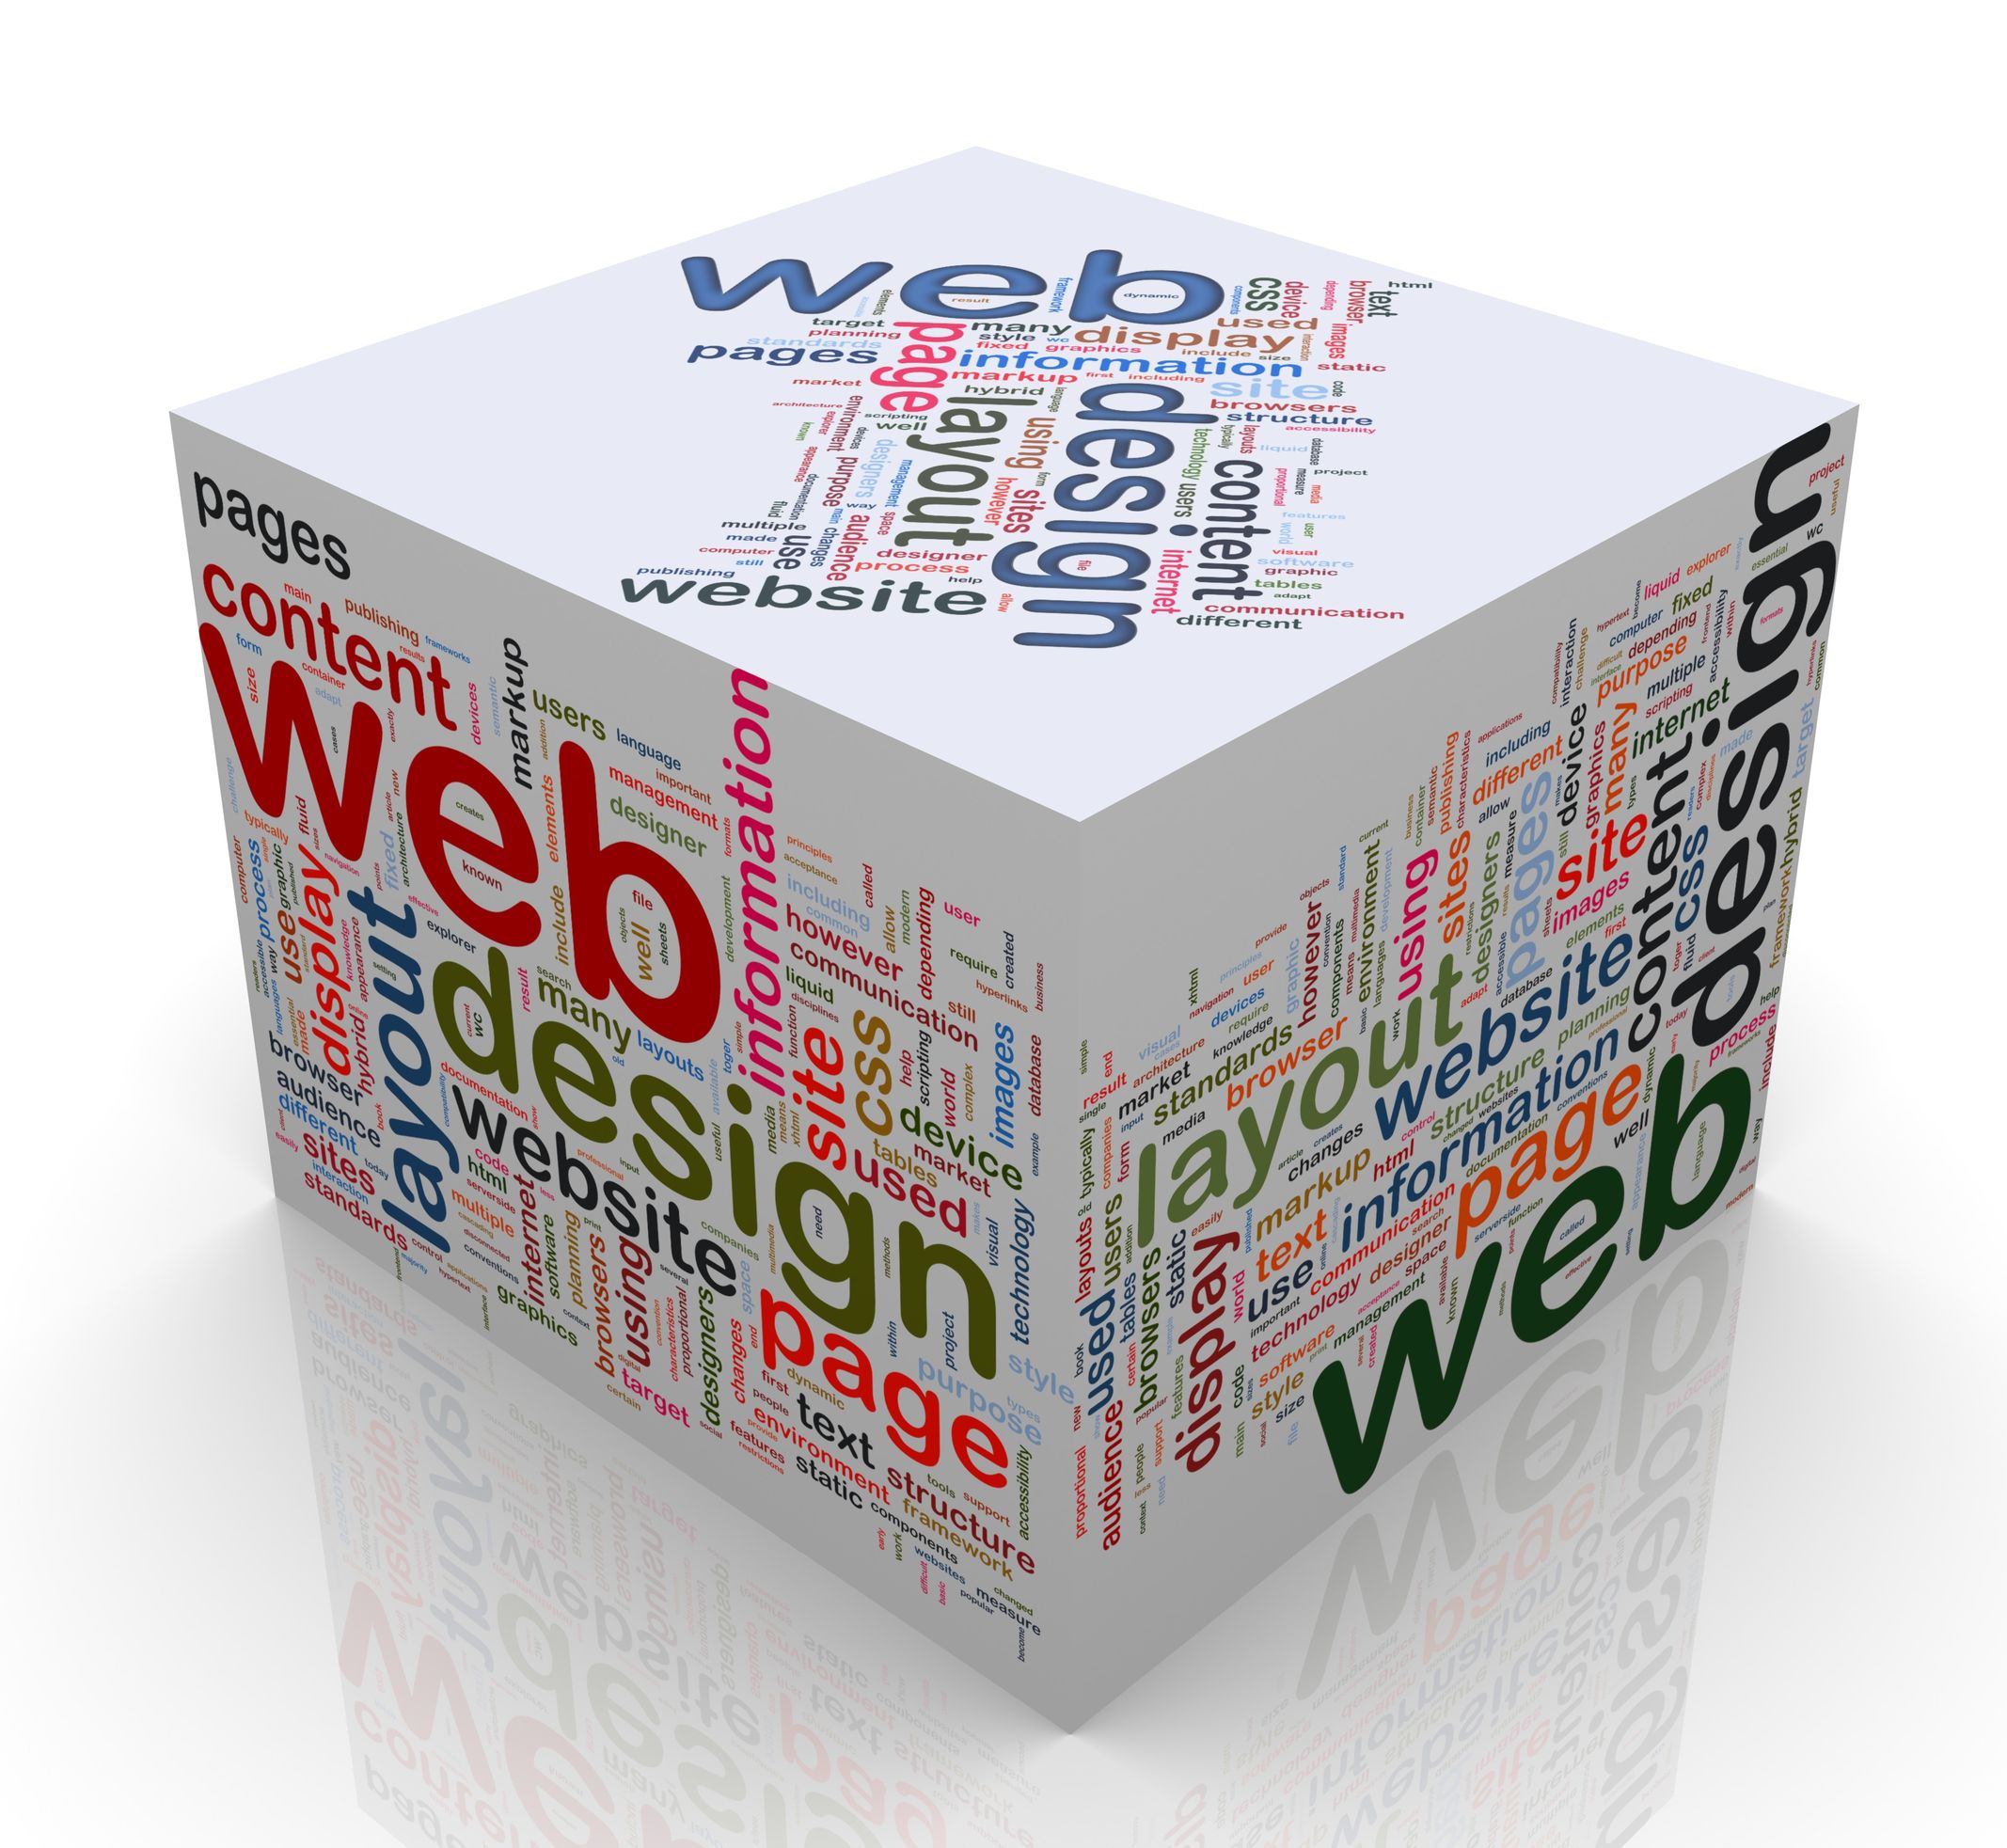 6 Signs of a Bad Web Design